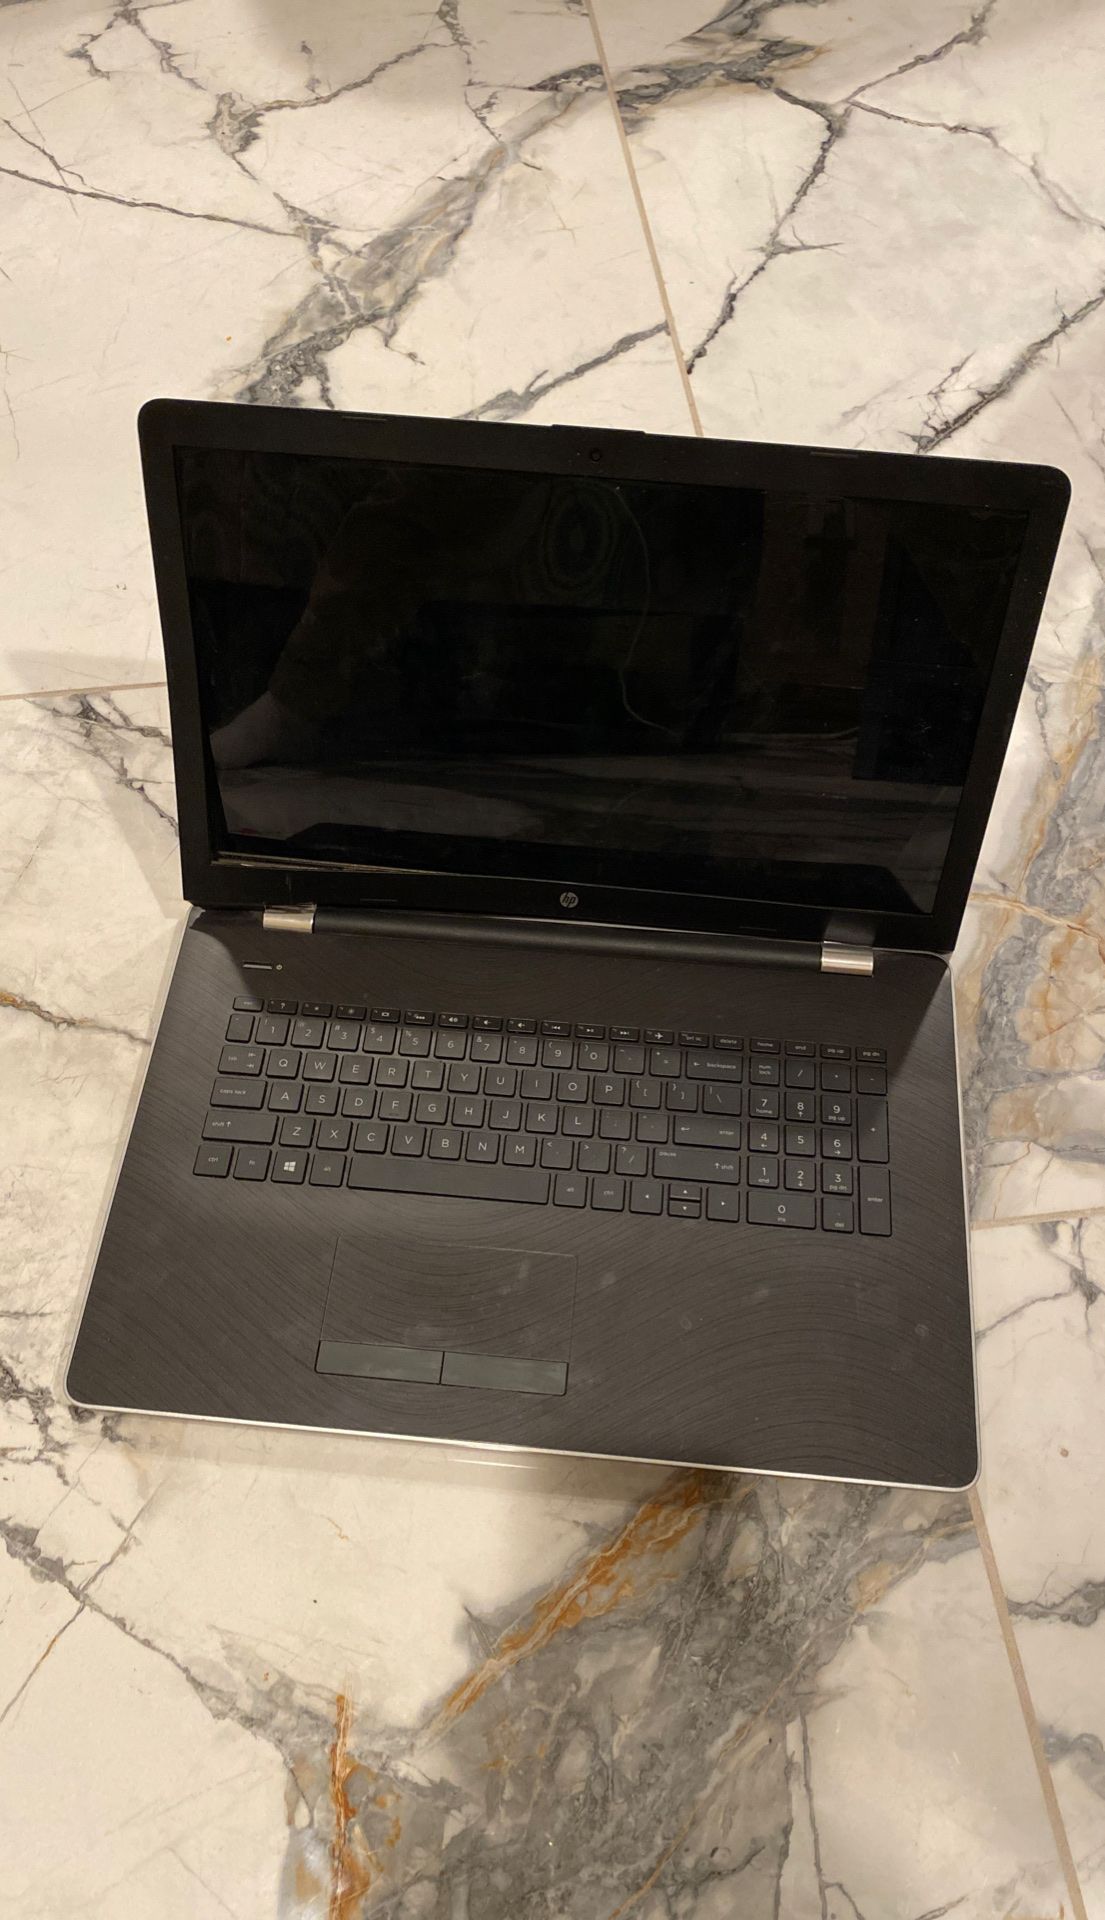 HP touchscreen laptop goes for 800